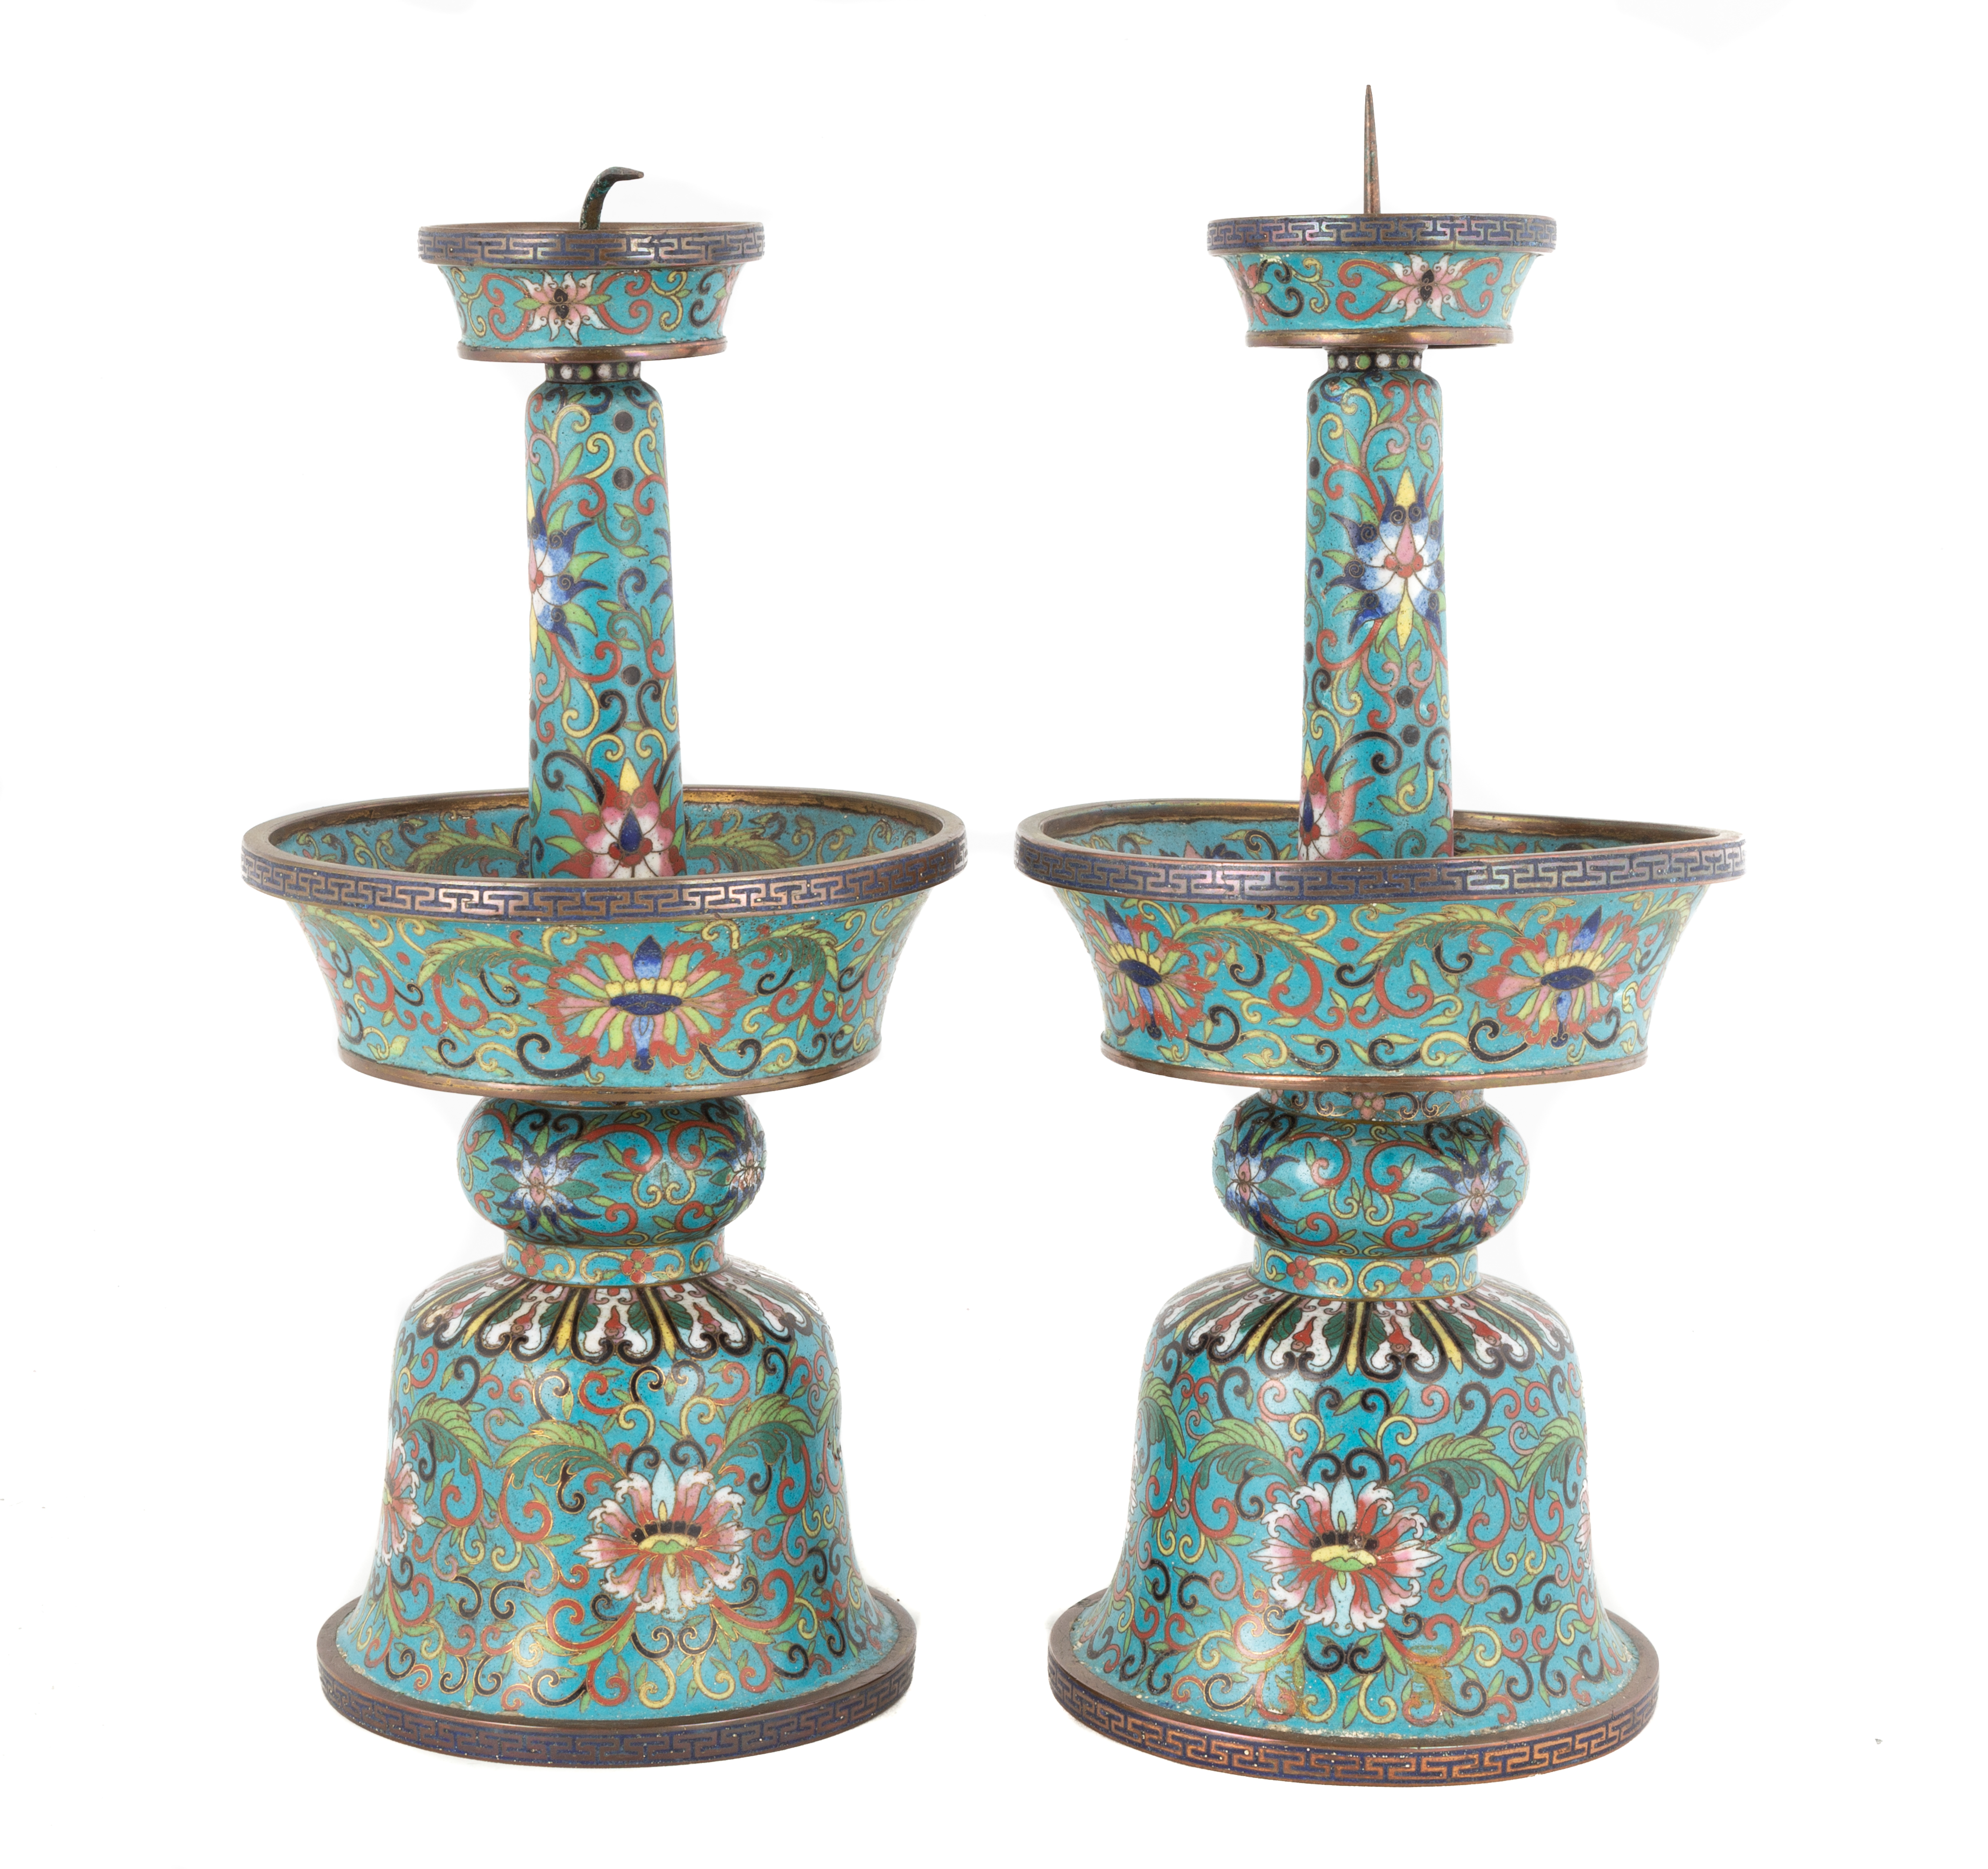 PAIR OF CHINESE CLOISONN PRICKETS 2c878b